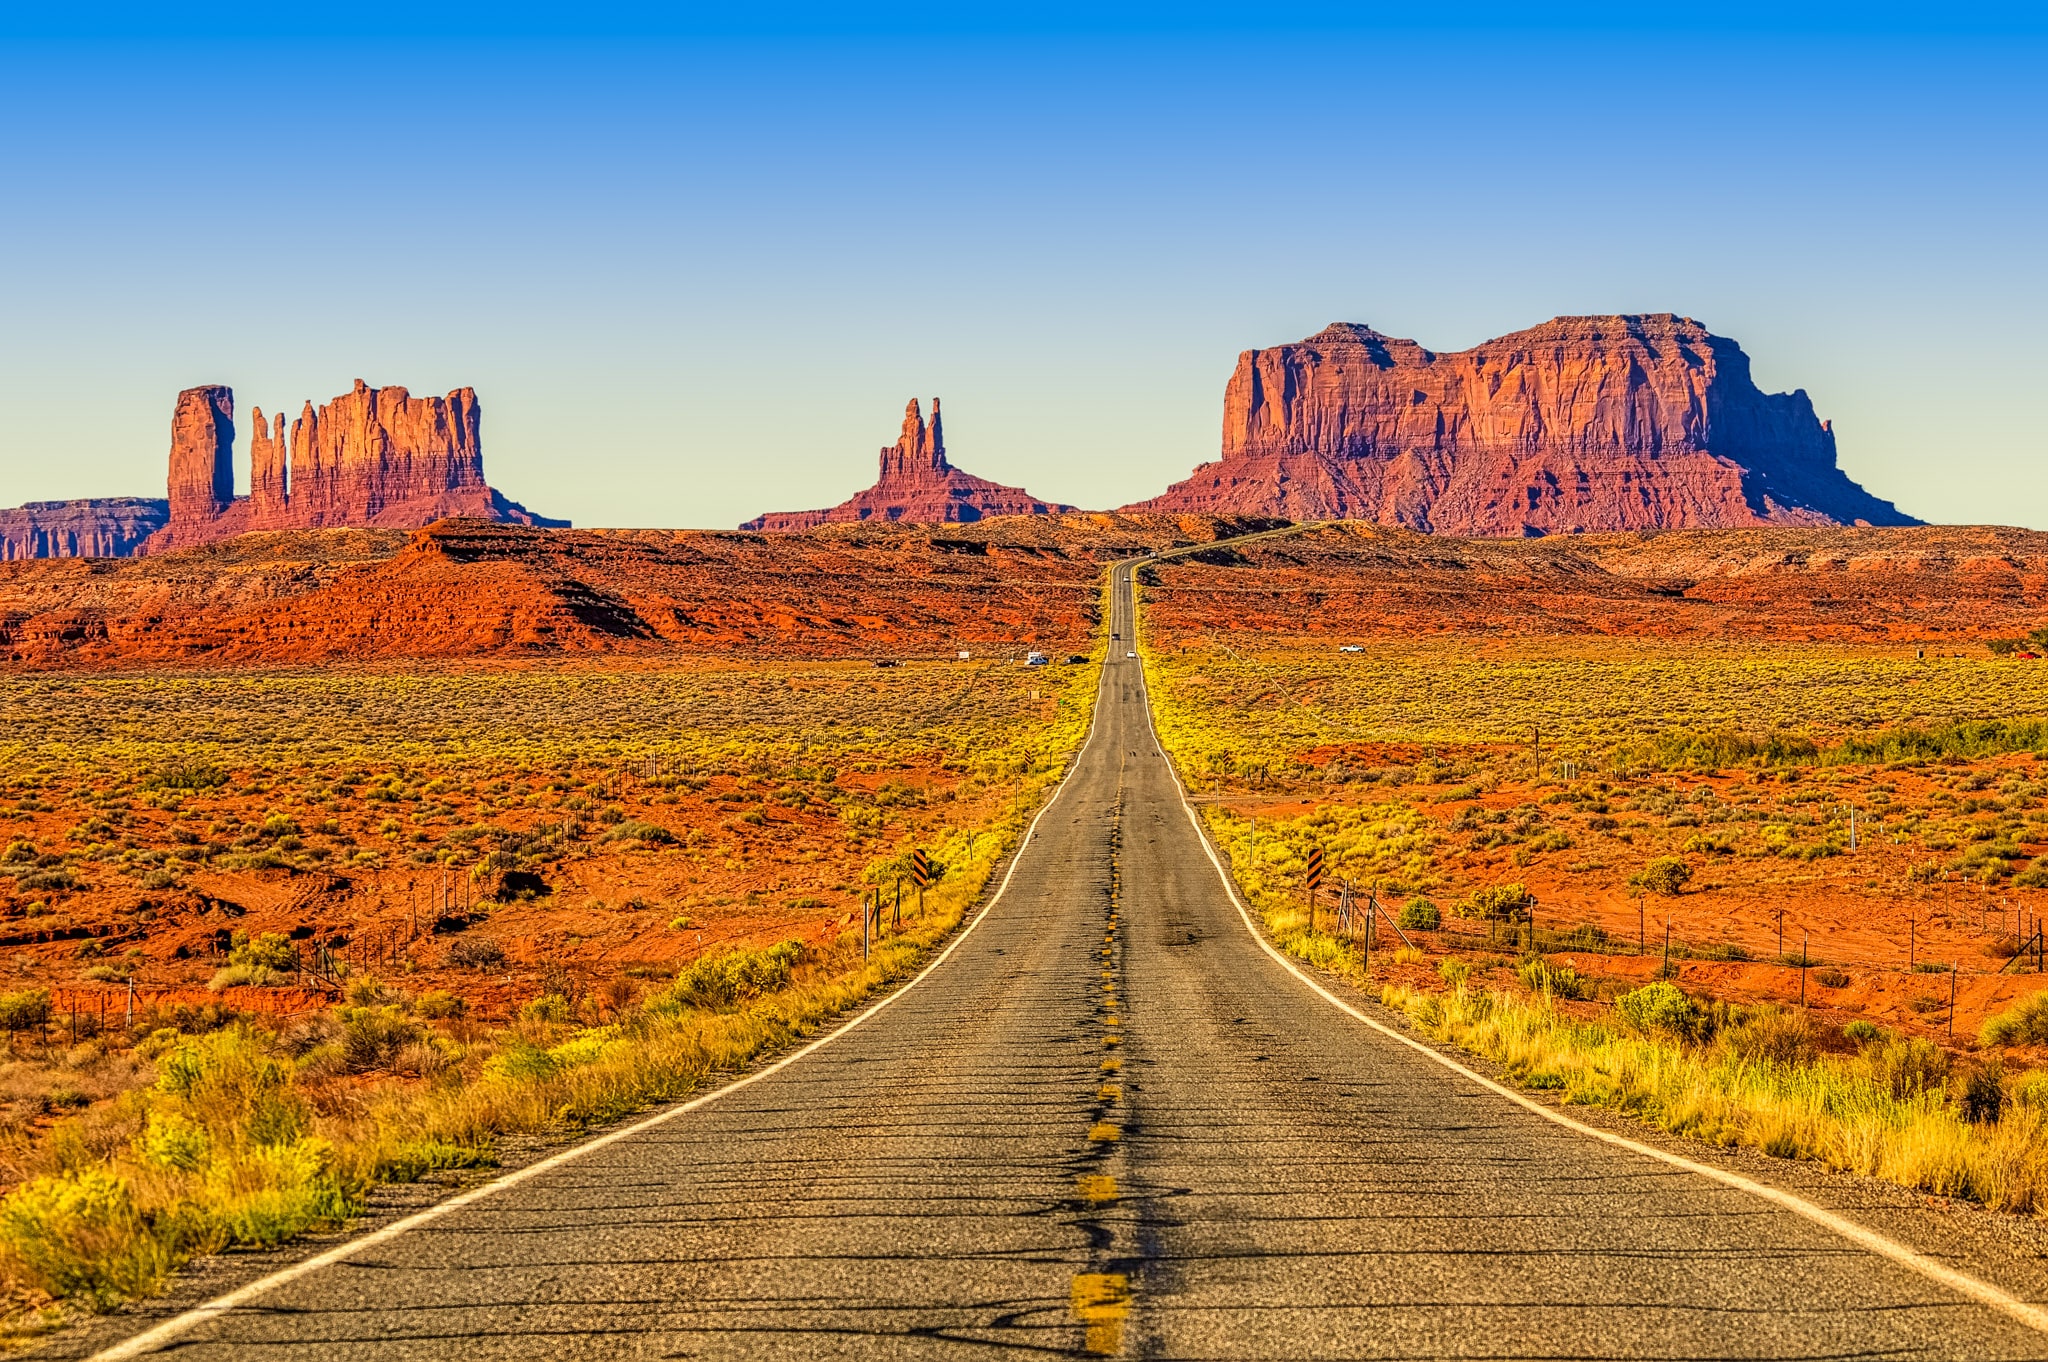 This is probably the most famous scene in southwest landscapes. It is the entrance road, Utah Highway 163, that takes you into Monument Valley Navajo Tribal Park. It has been made famous by numerous movies, such as John Ford's "Stagecoach."